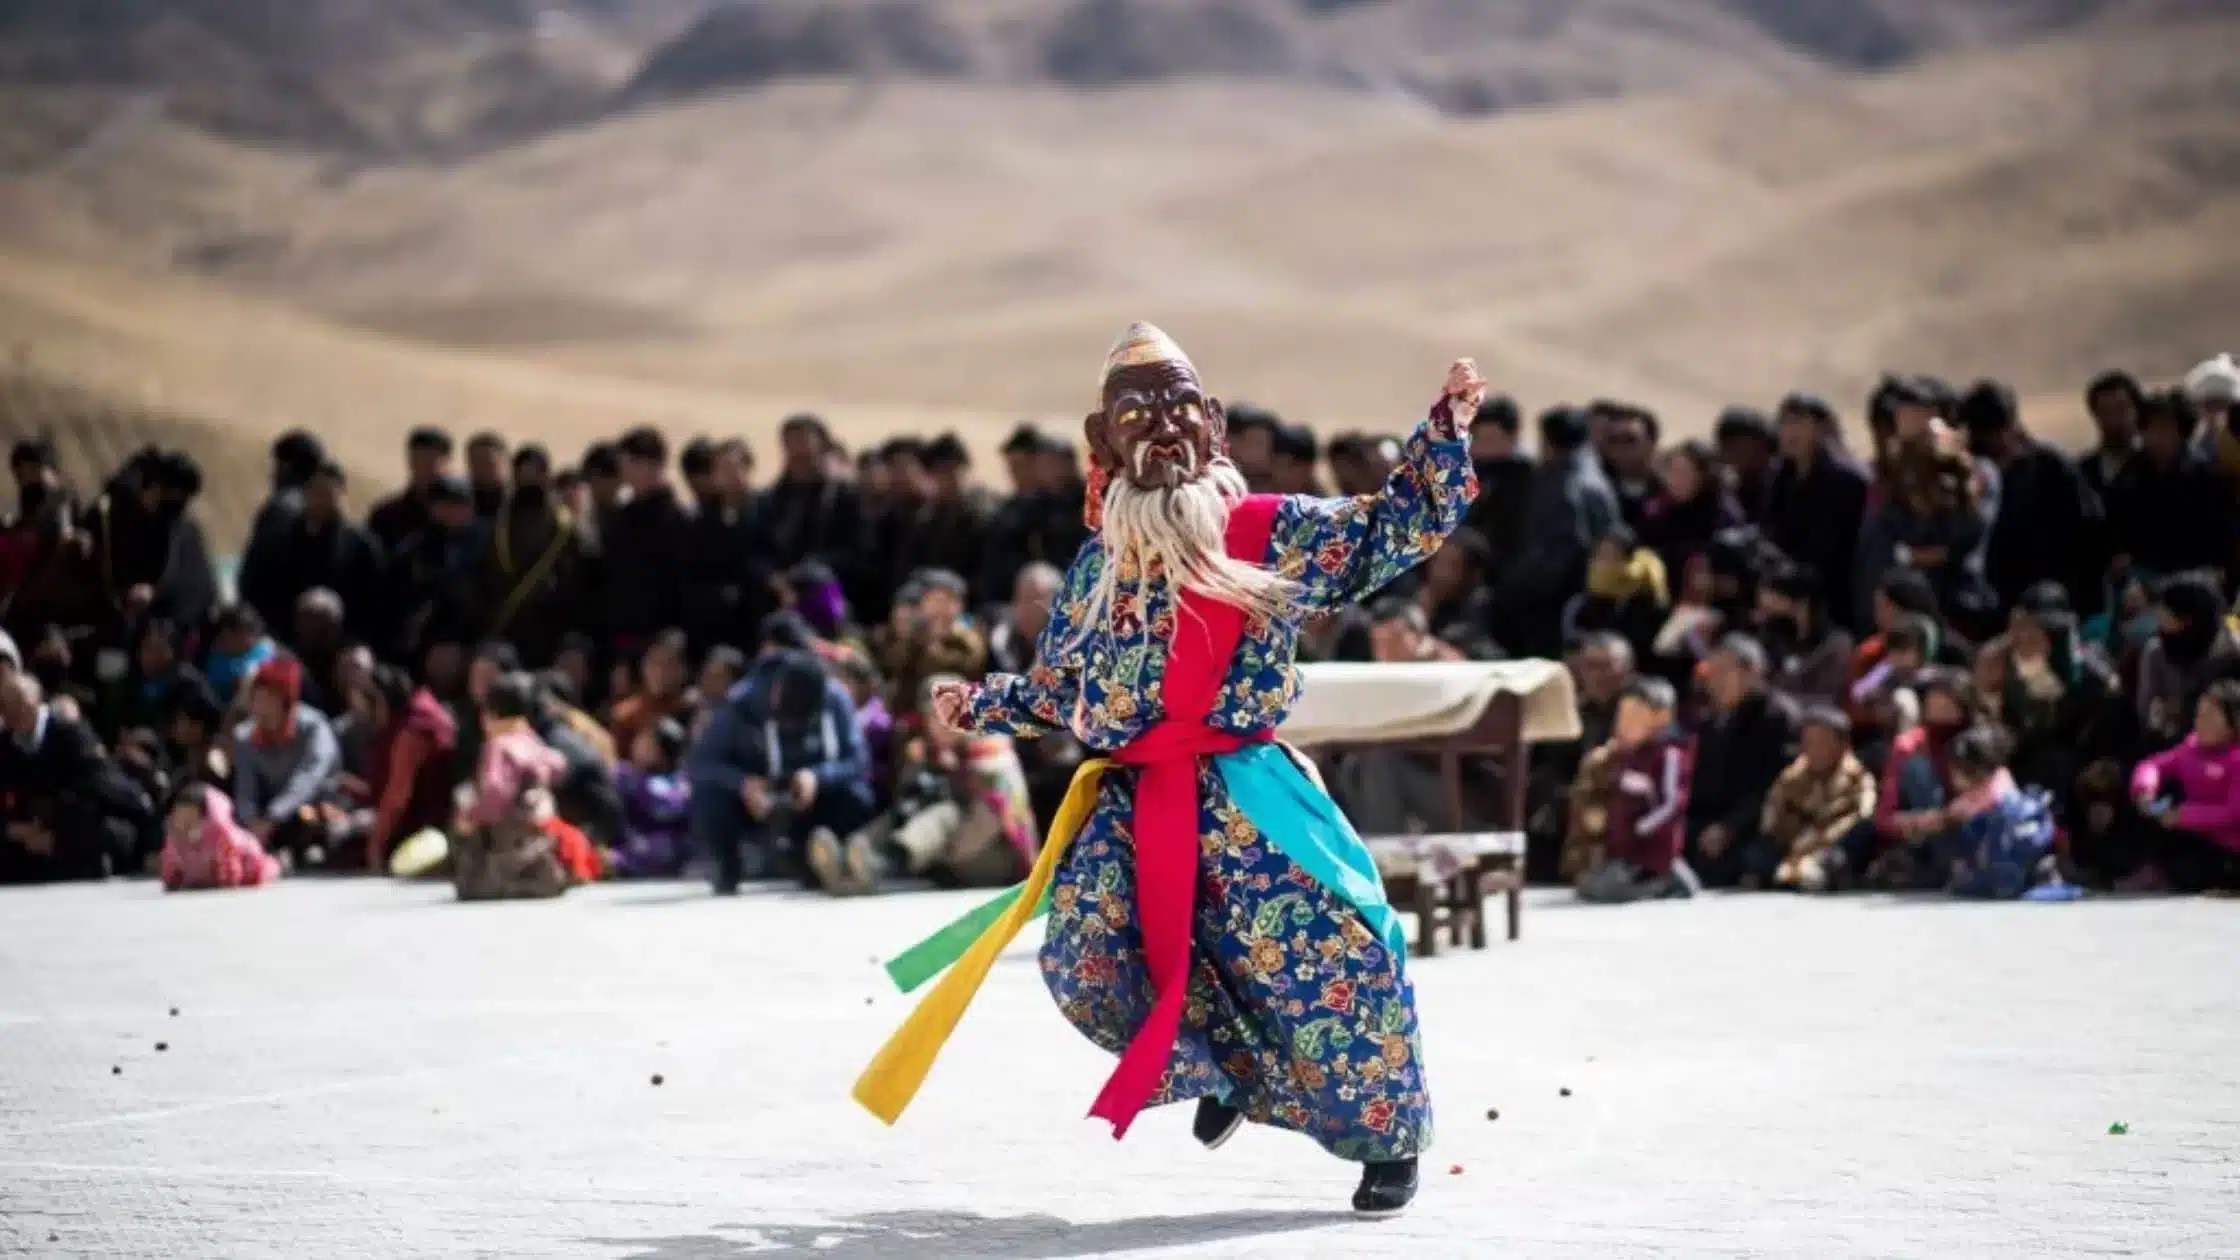 Losar, Tibetans New Year is celebrated in Himachal